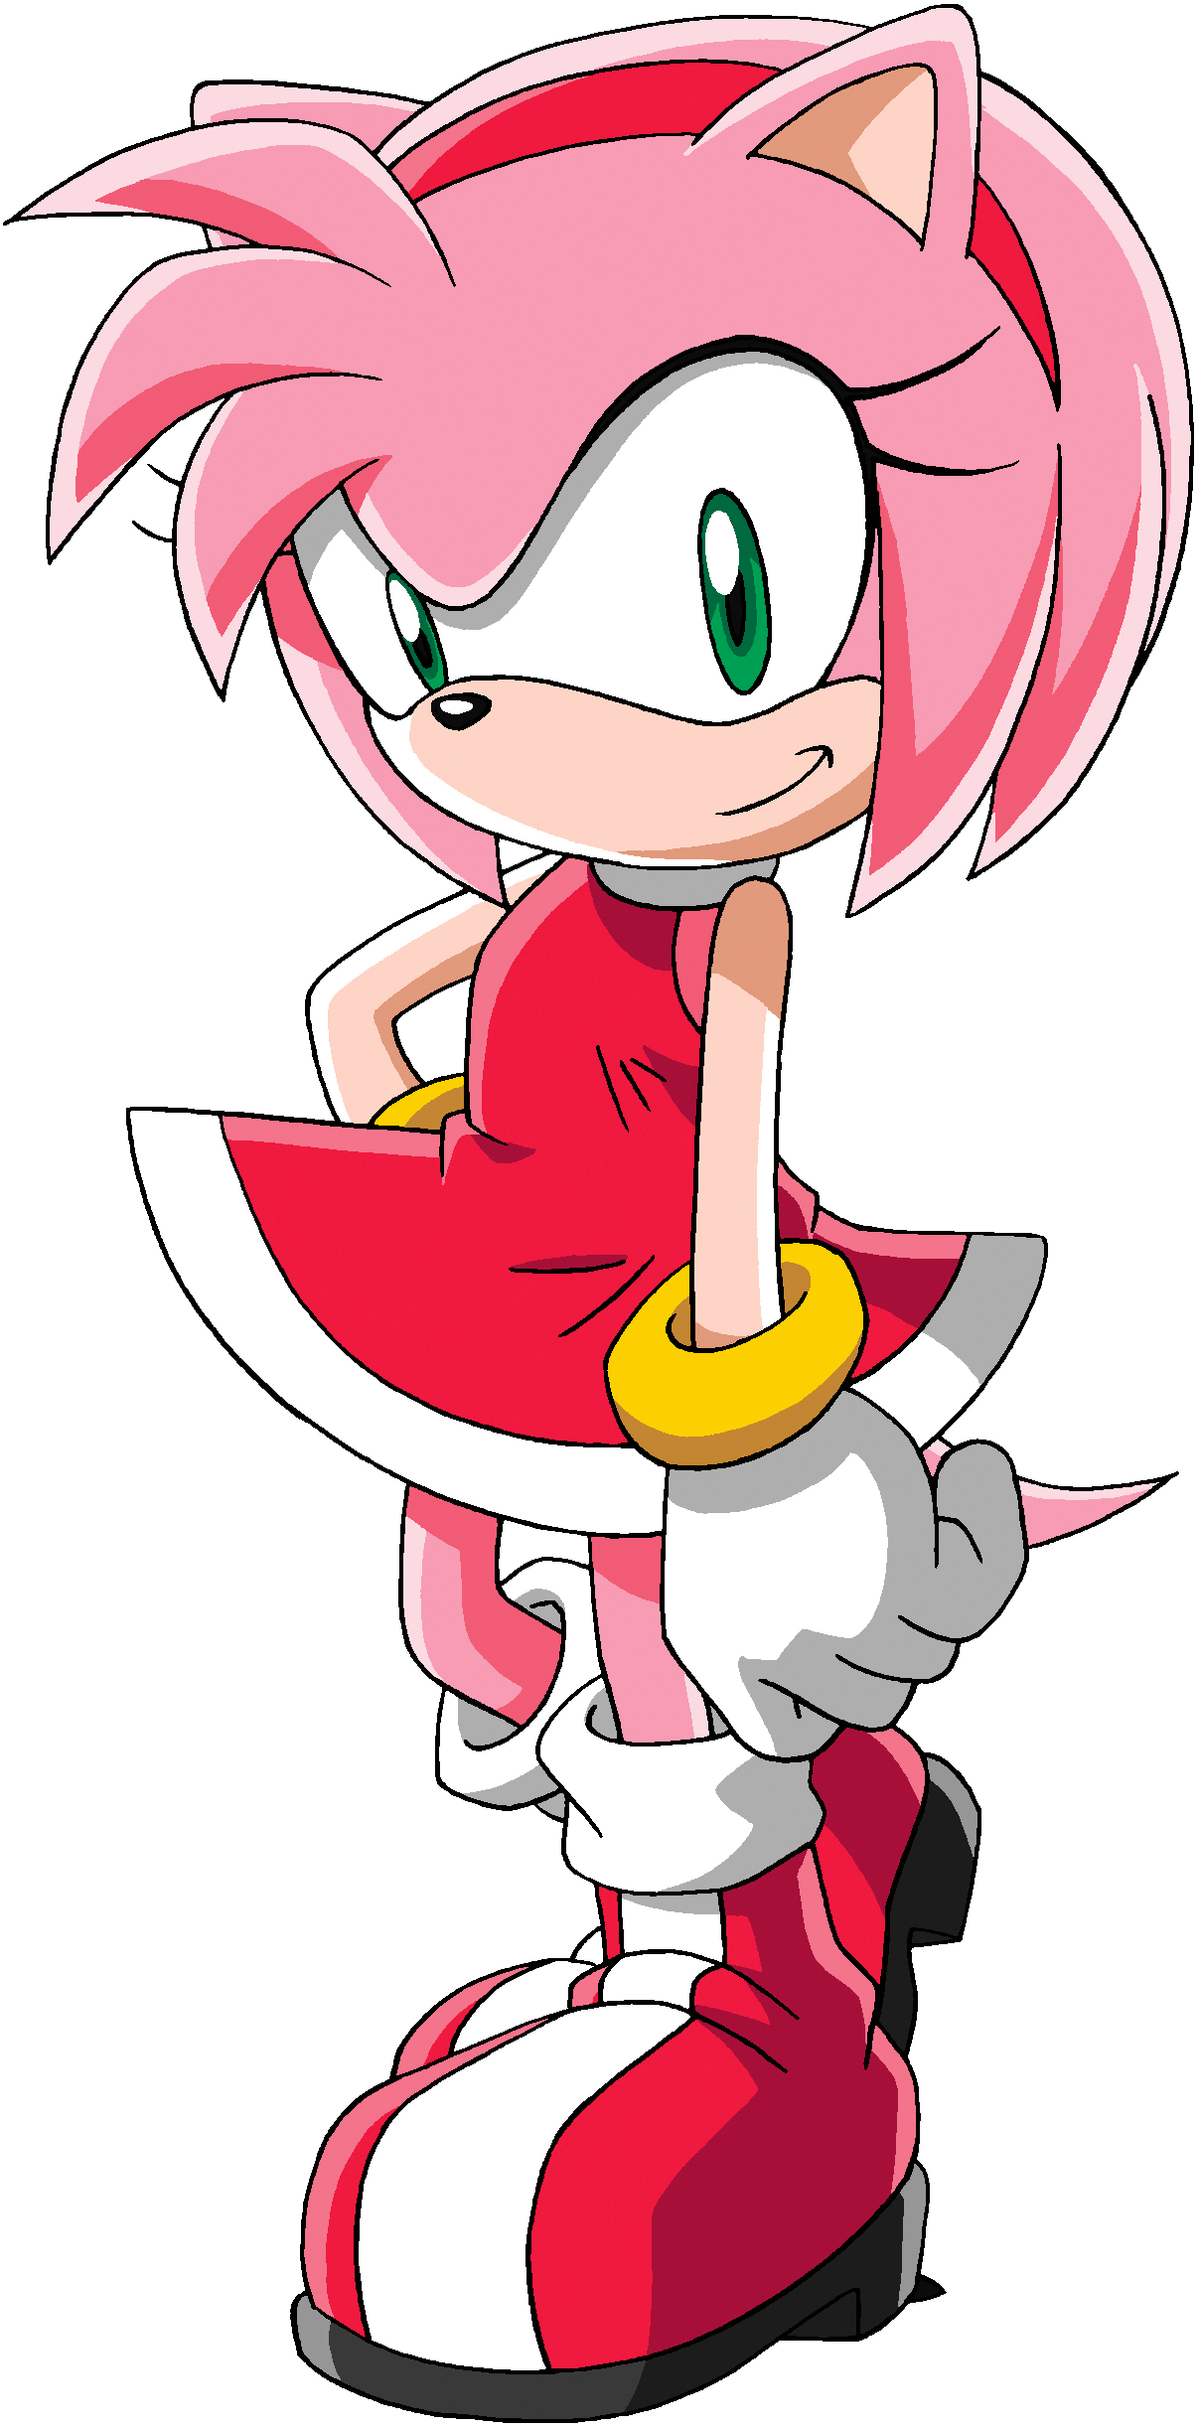 Amy Rose the Hedgehog, Sonic Dash Wiki